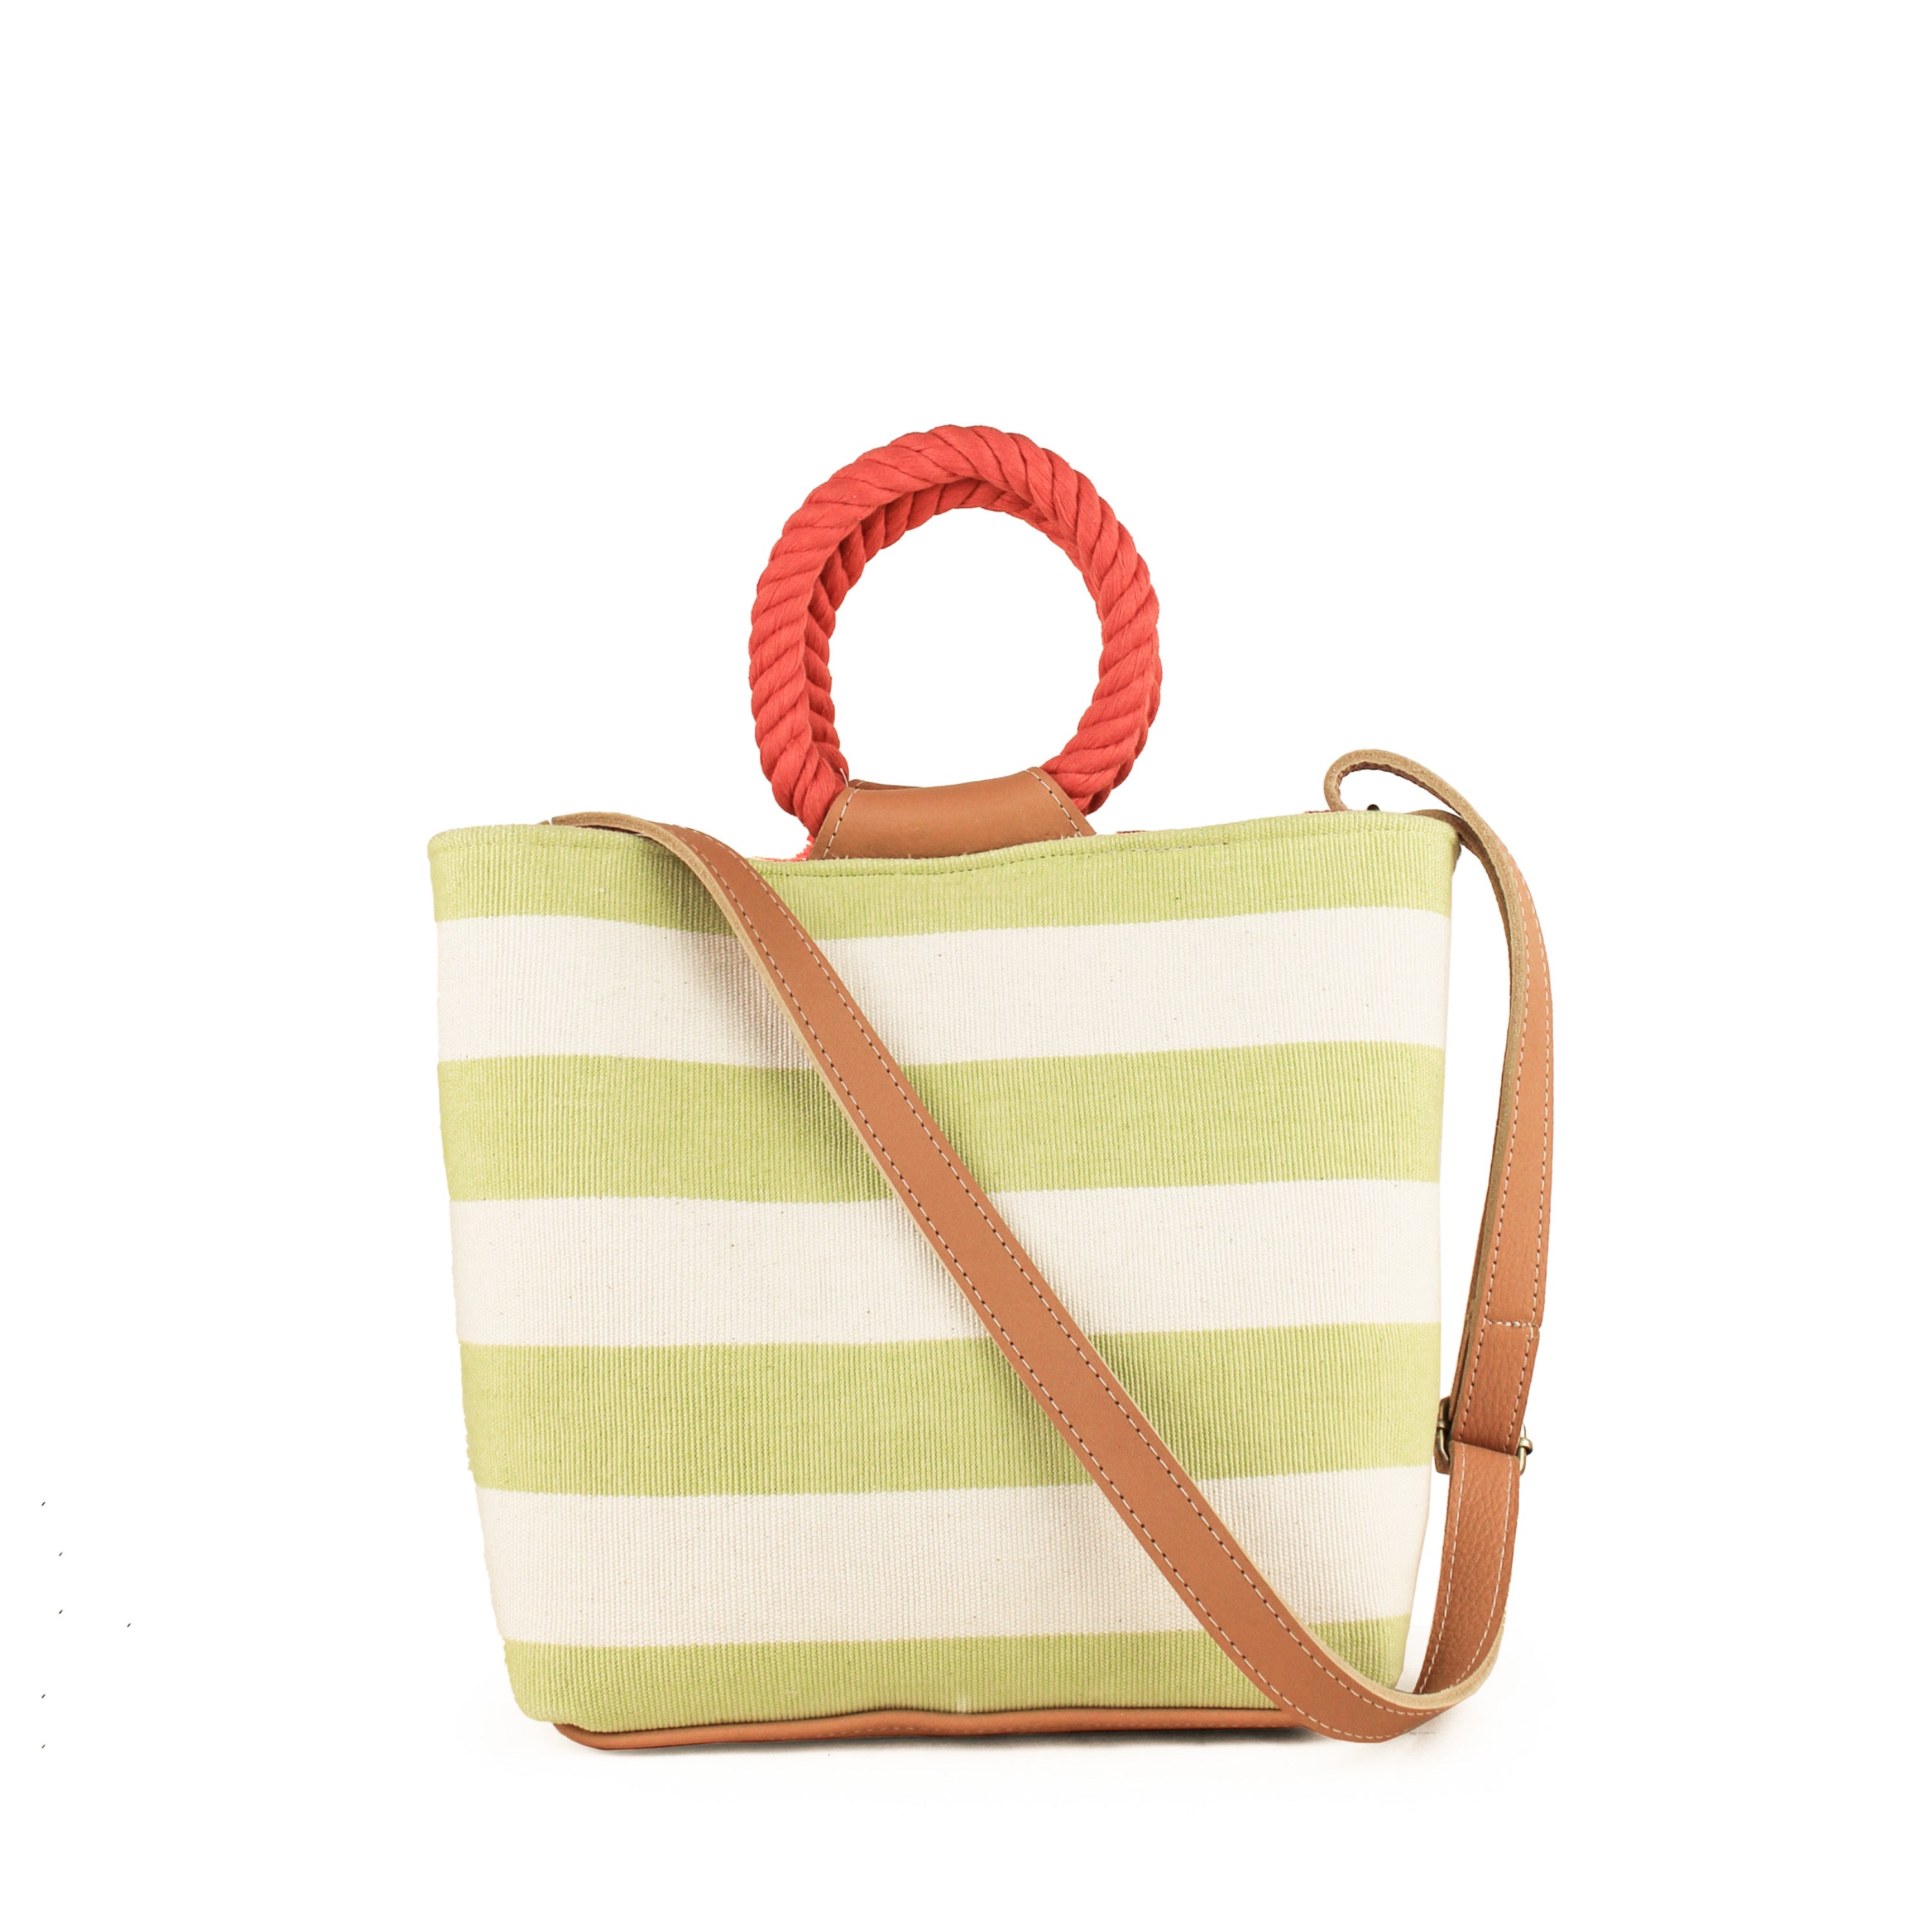 Back of the hand woven artisan Dalila Midi Tote in Heatwaves. The back pattern has thick horizontal pastel green and white stripes. Photo is shown with the leather adjustable strap.